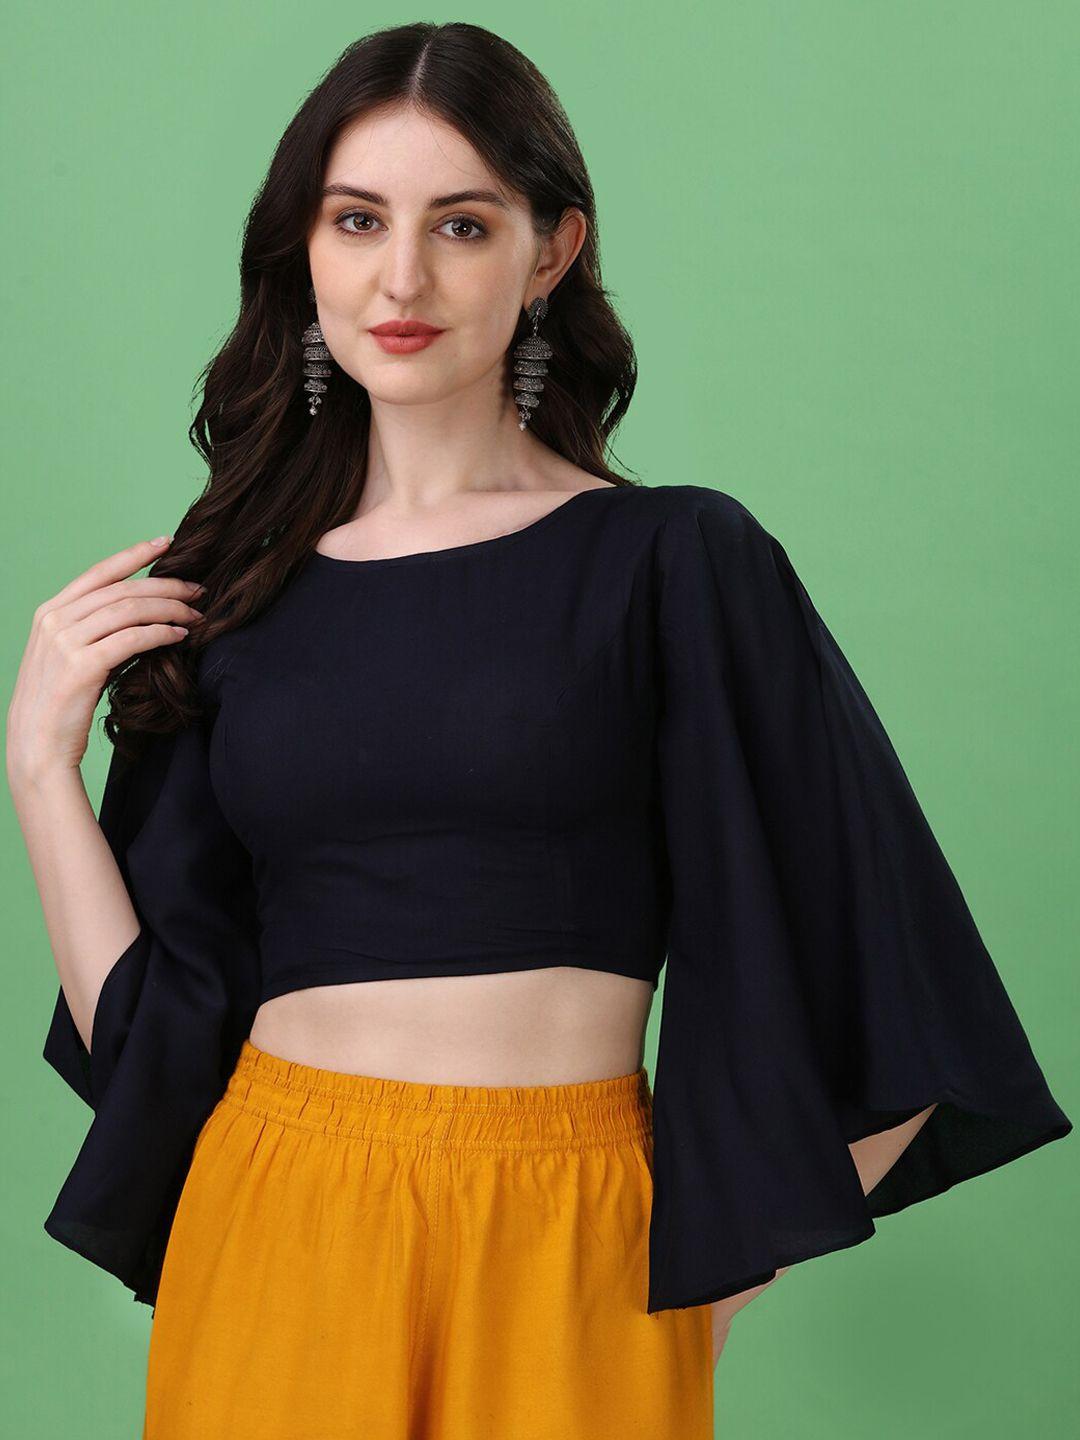 oomph! boat neck flared sleeve saree blouse